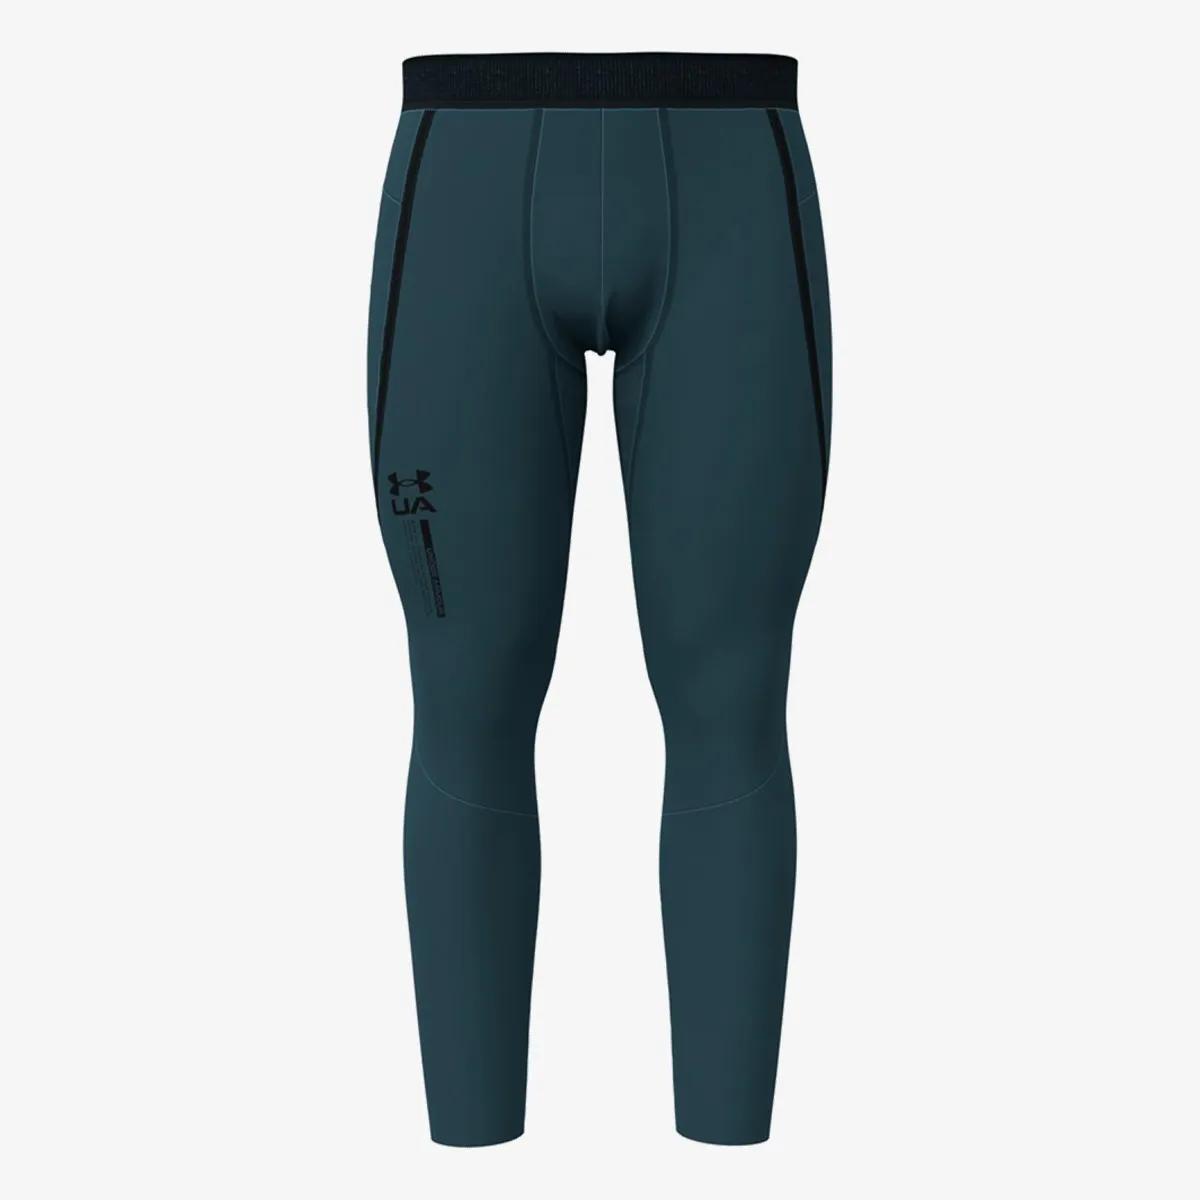 Under Armour IsoChill Perforation Print 